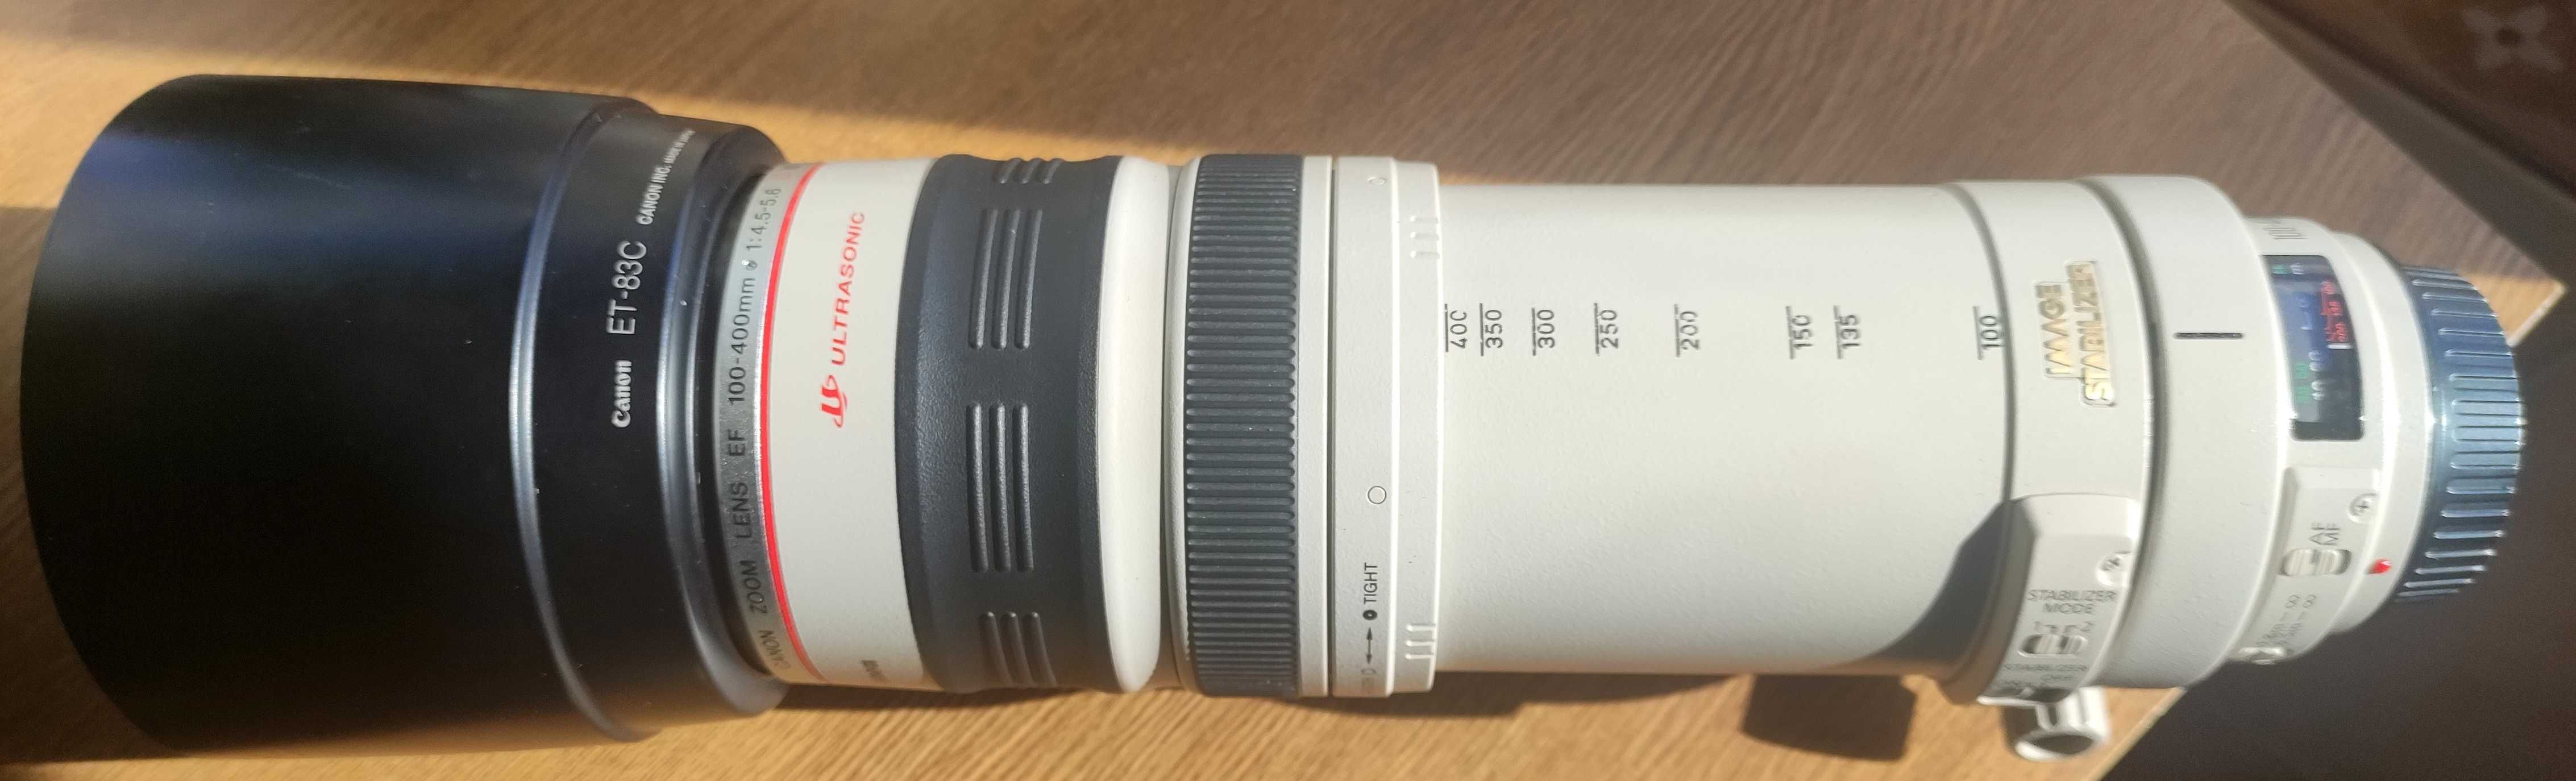 Objectiva Canon  EF100-400mm f/4.5-5.6L IS USM